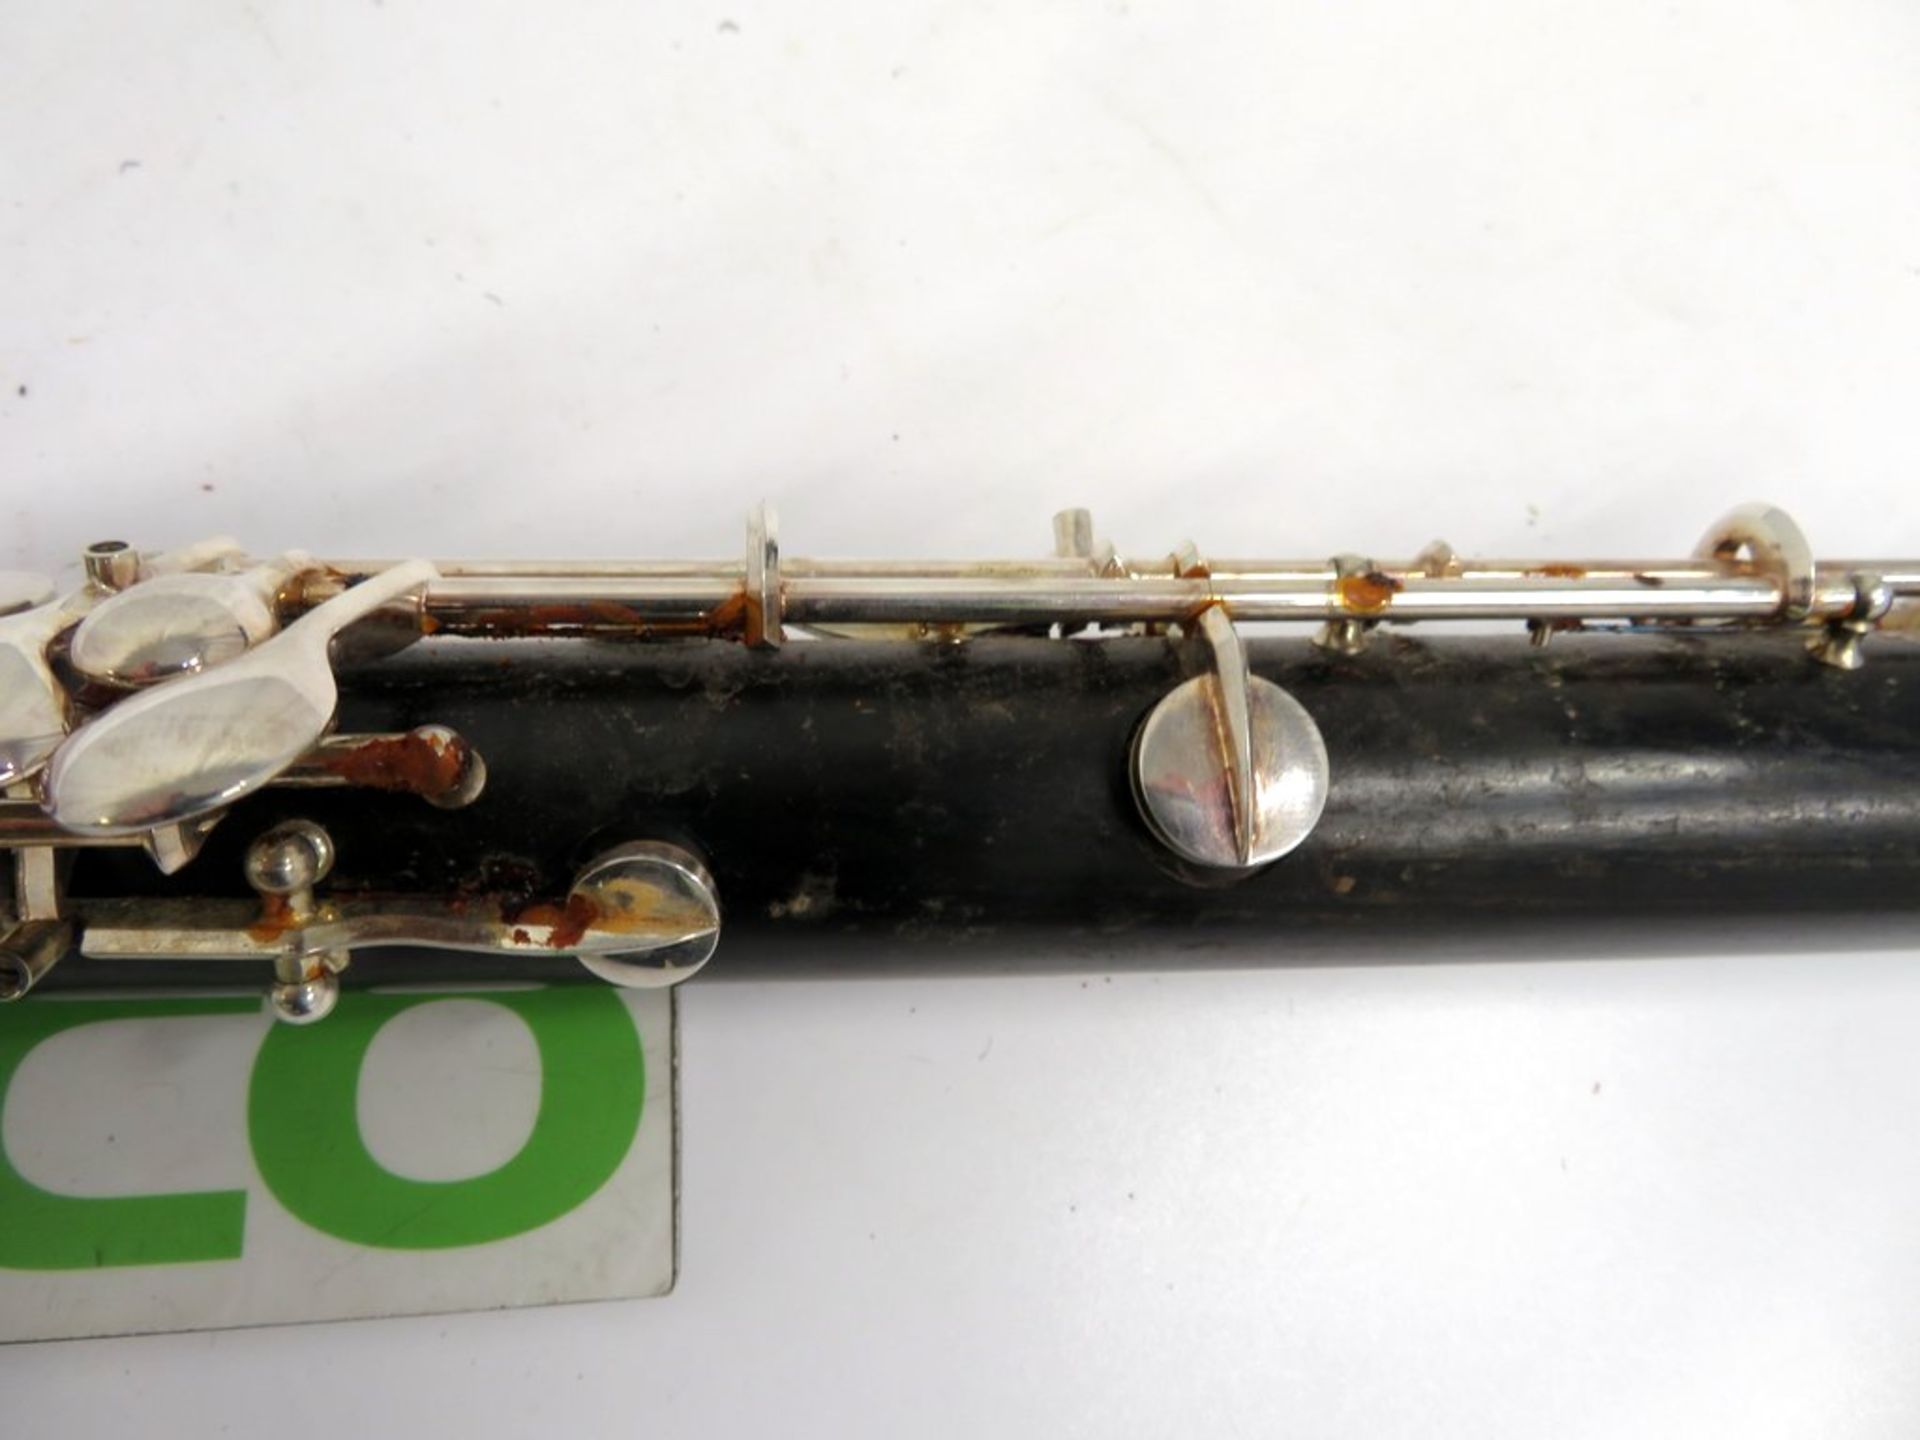 Howarth Cor Anglais S20C With Case. Serial Number: D0400. Please Note That This Item Has - Image 19 of 20